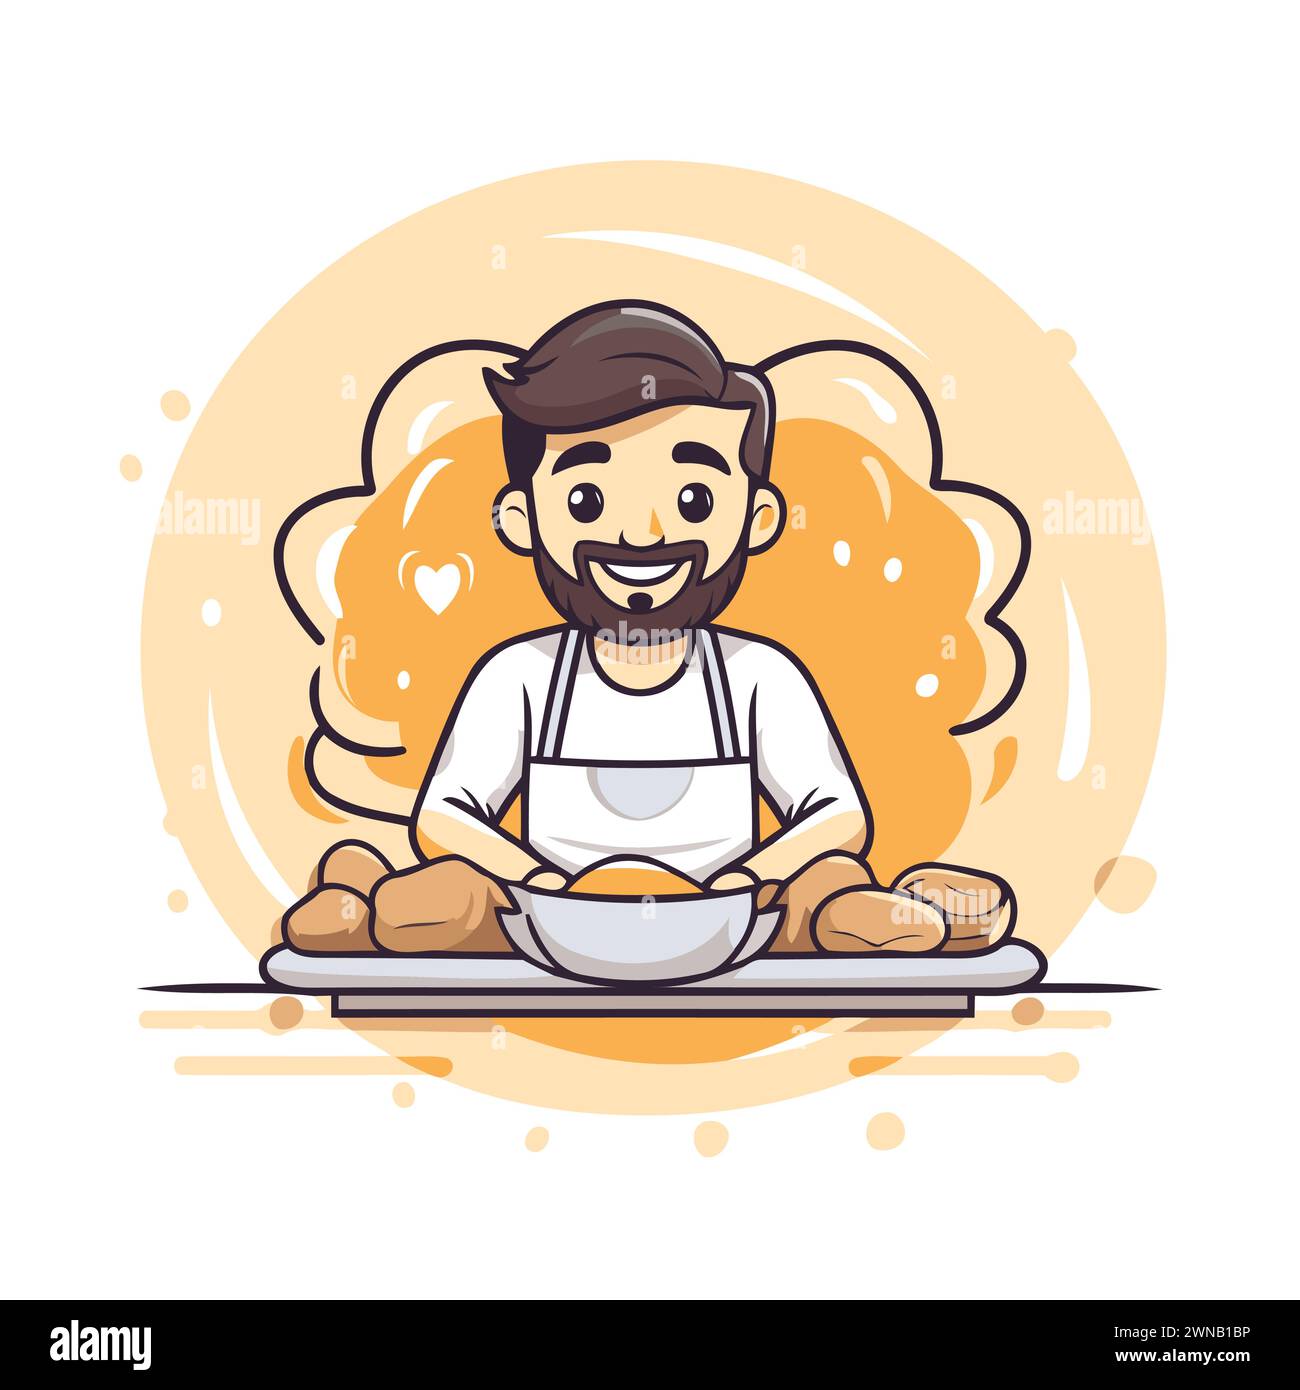 Vector illustration of a man cooking bread in the kitchen. Cartoon style. Stock Vector